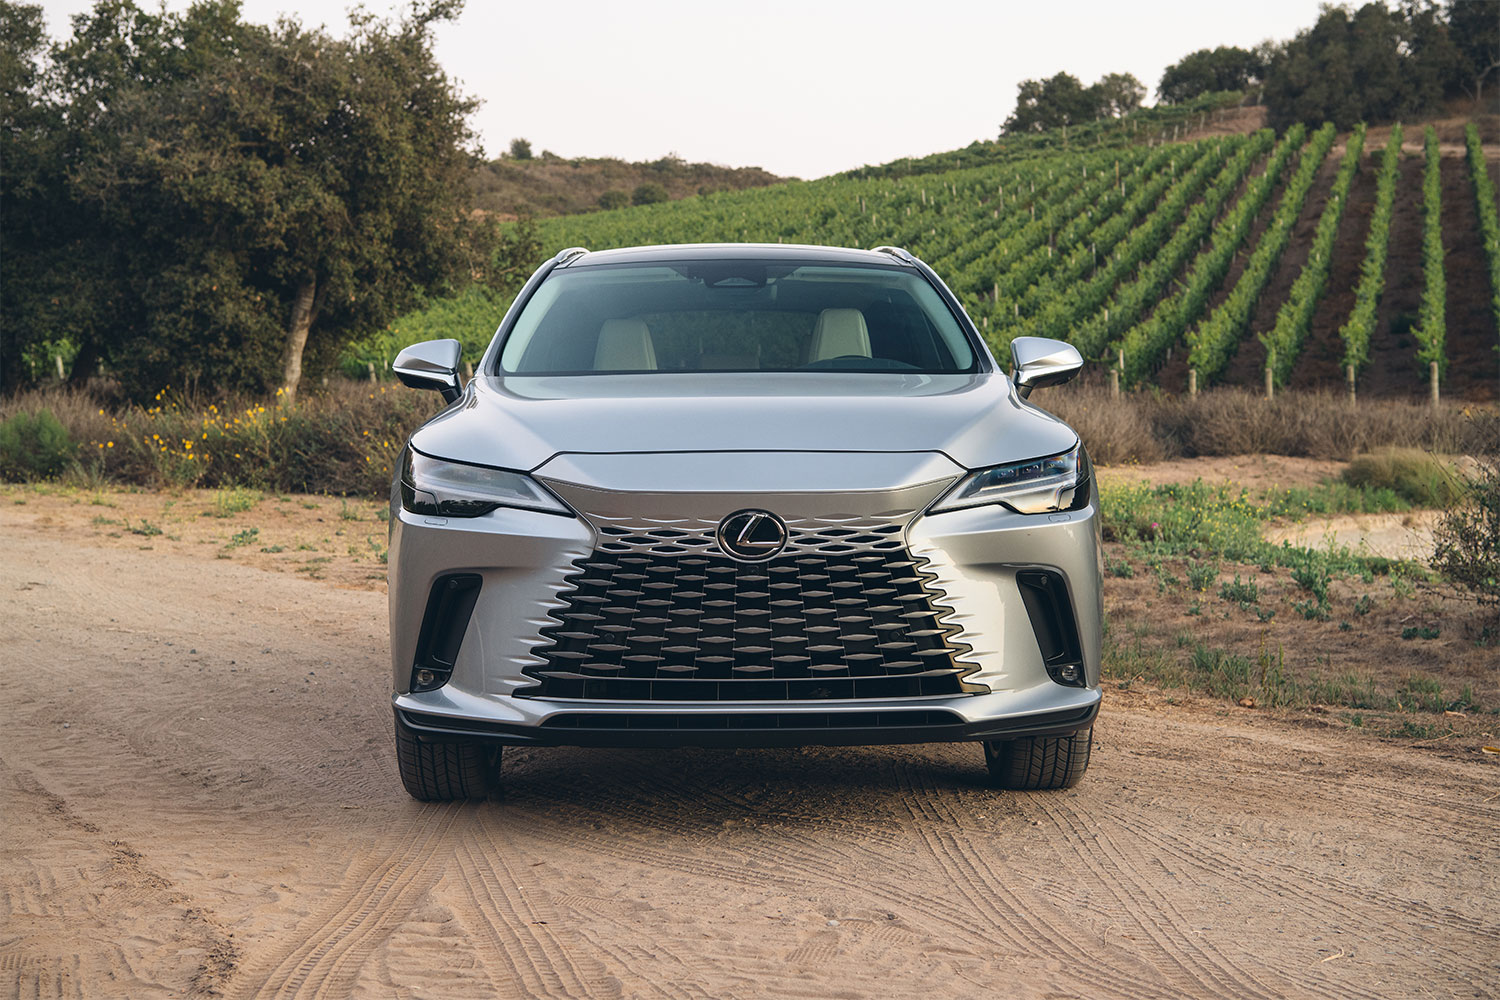 The front grille of the 2023 Lexus RX 350h hybrid SUV